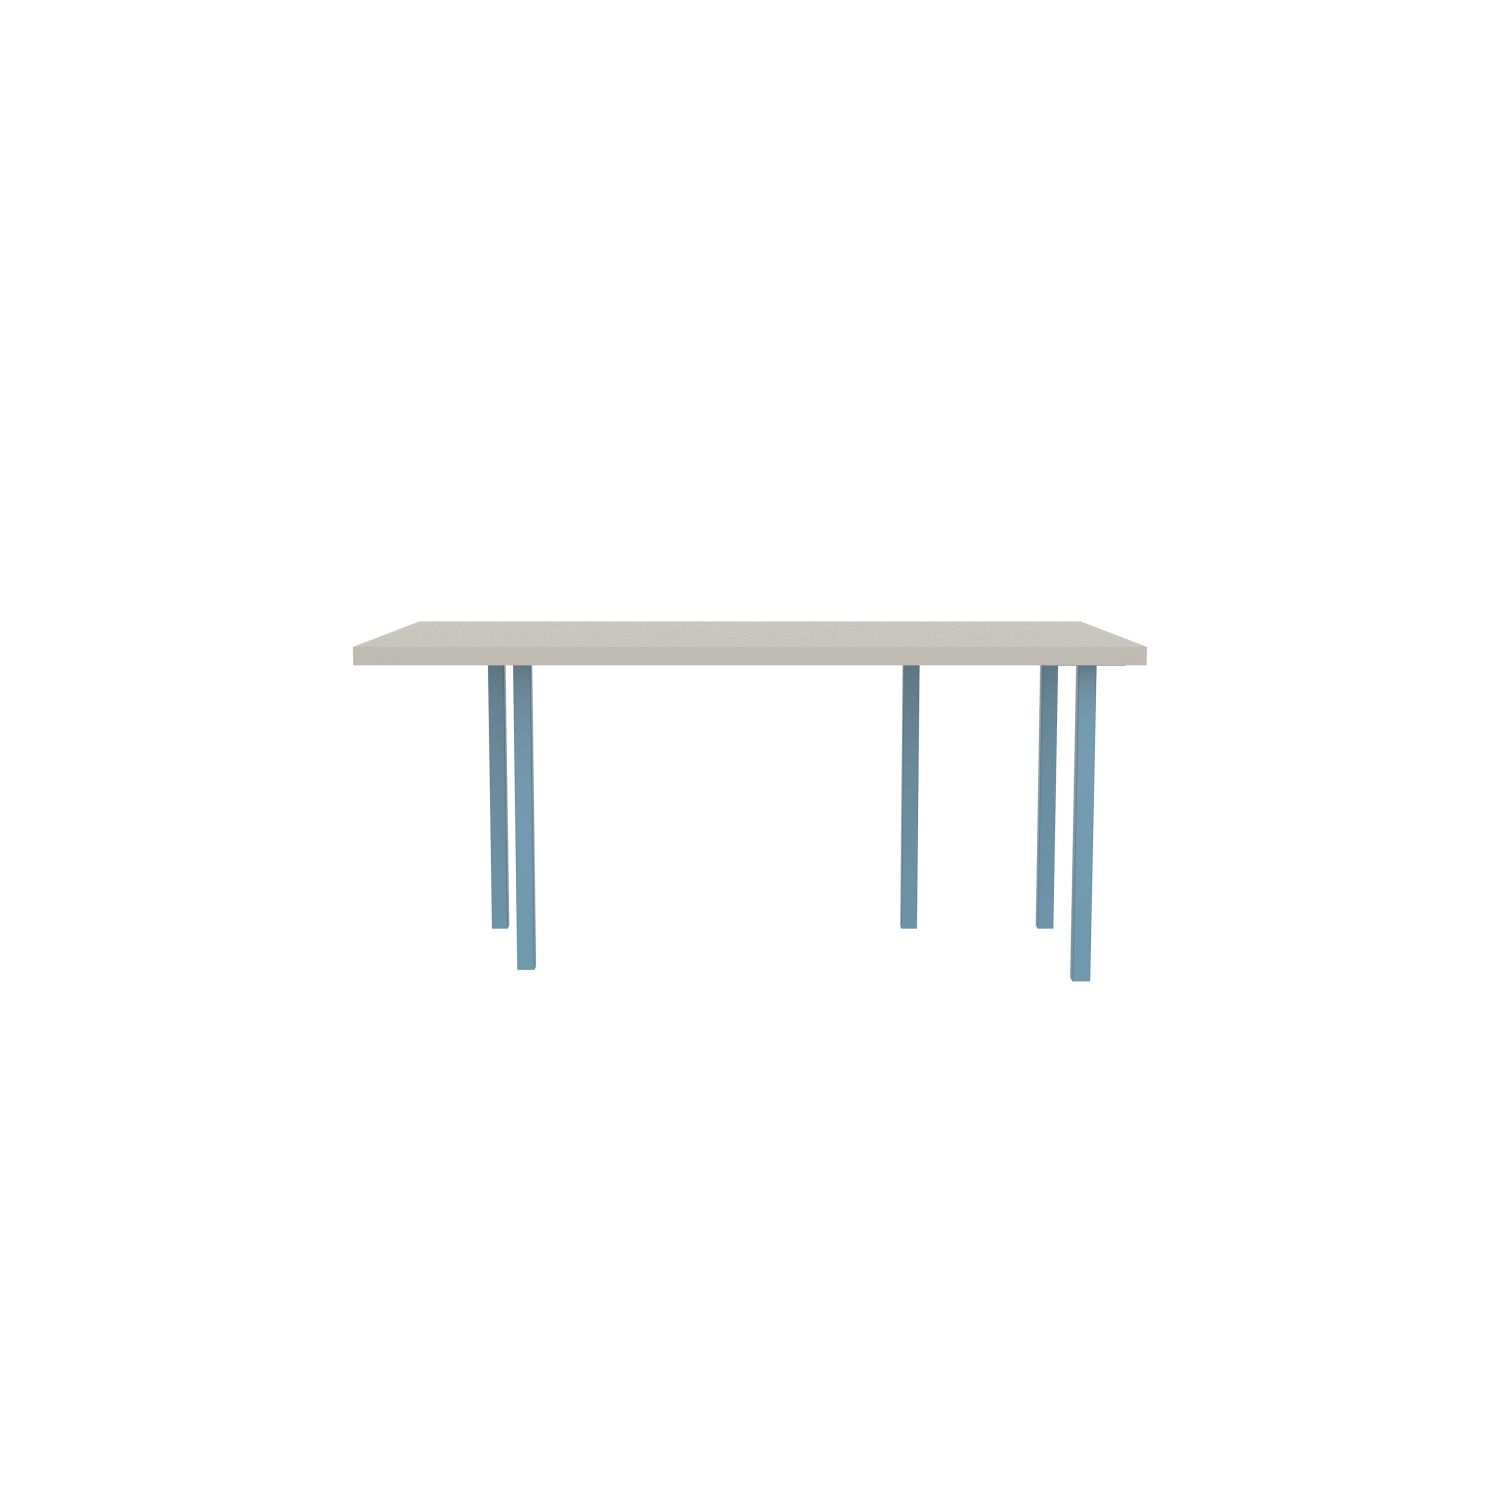 lensvelt bbrand table five fixed heigt 915x172 hpl white 50 mm price level 1 blue ral5024